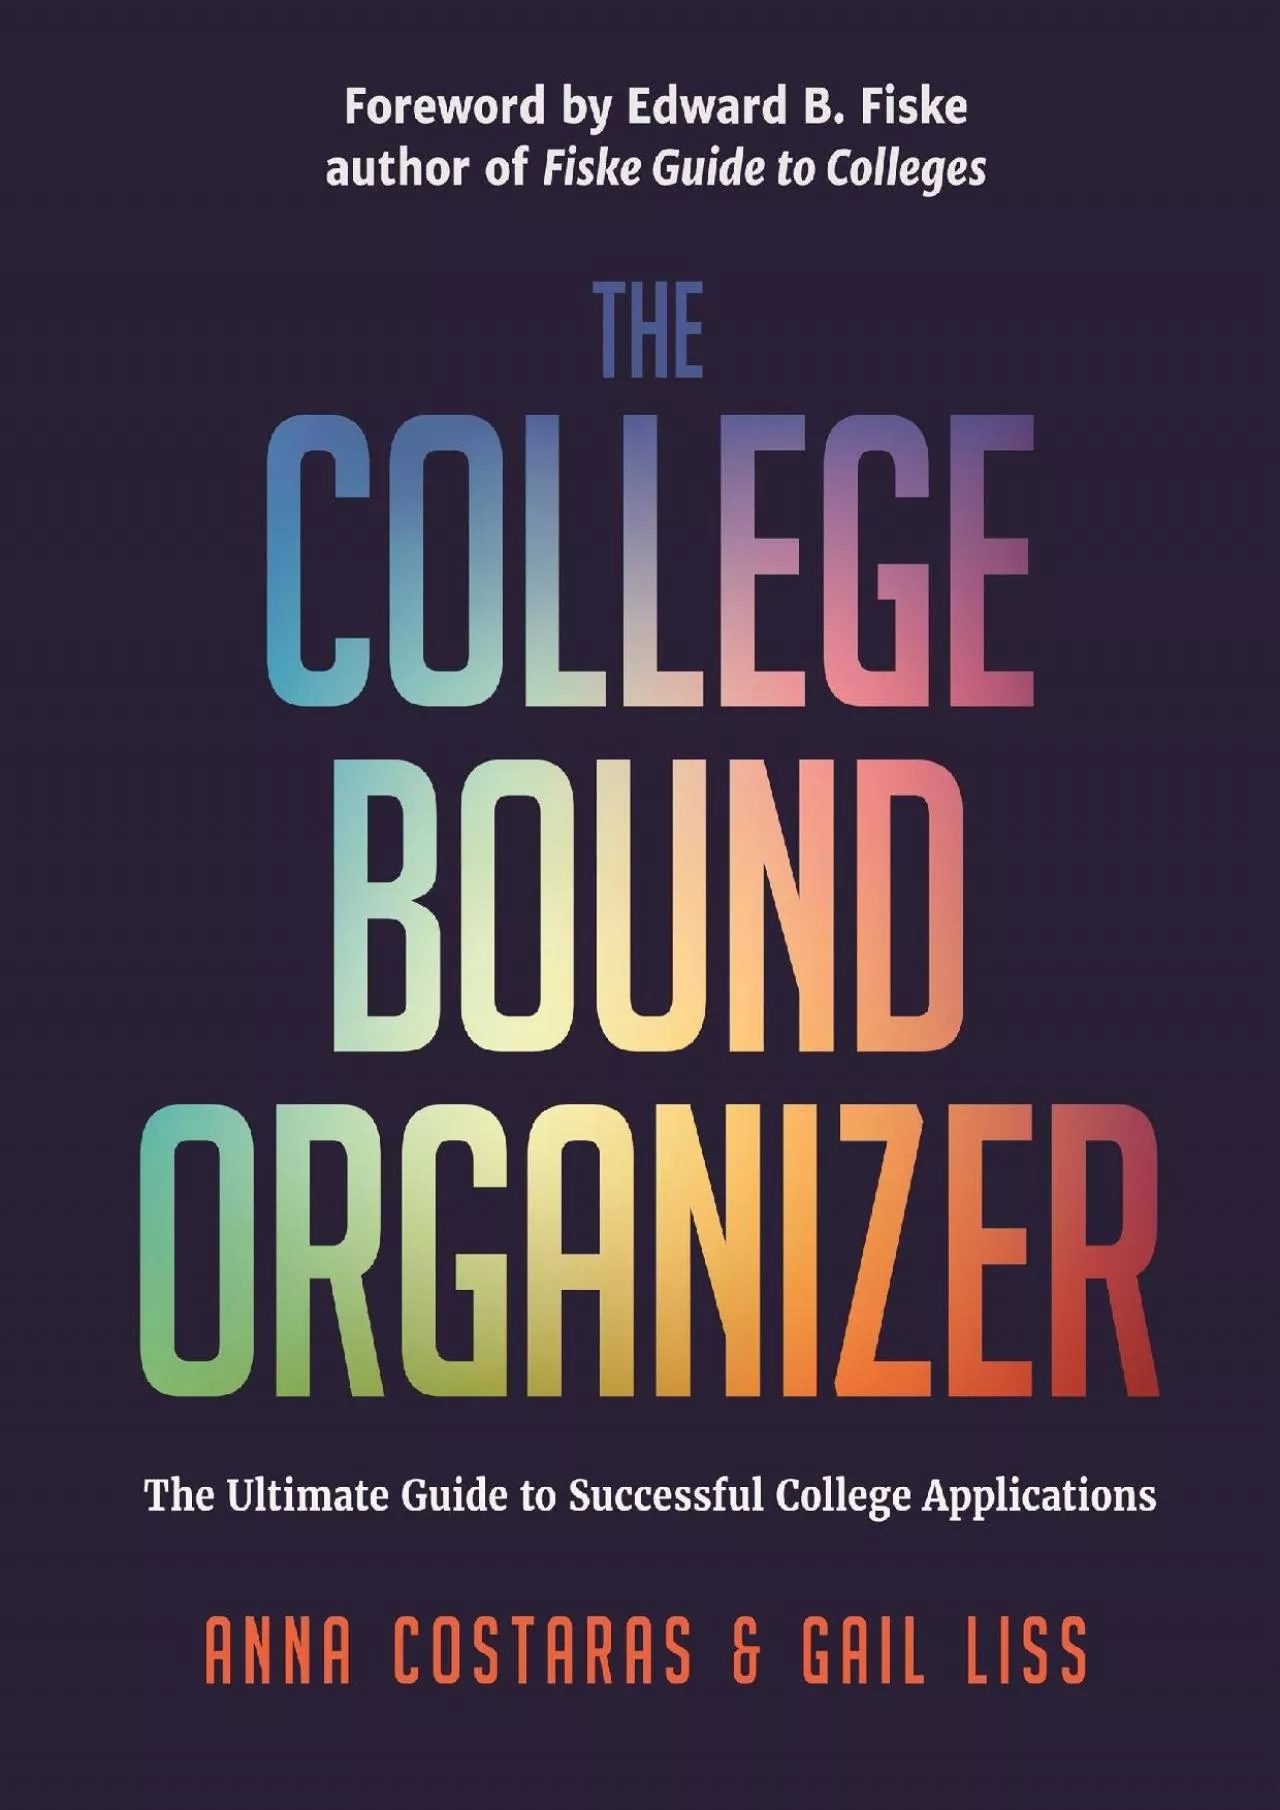 [DOWNLOAD] The College Bound Organizer: The Ultimate Guide to Successful College Applications